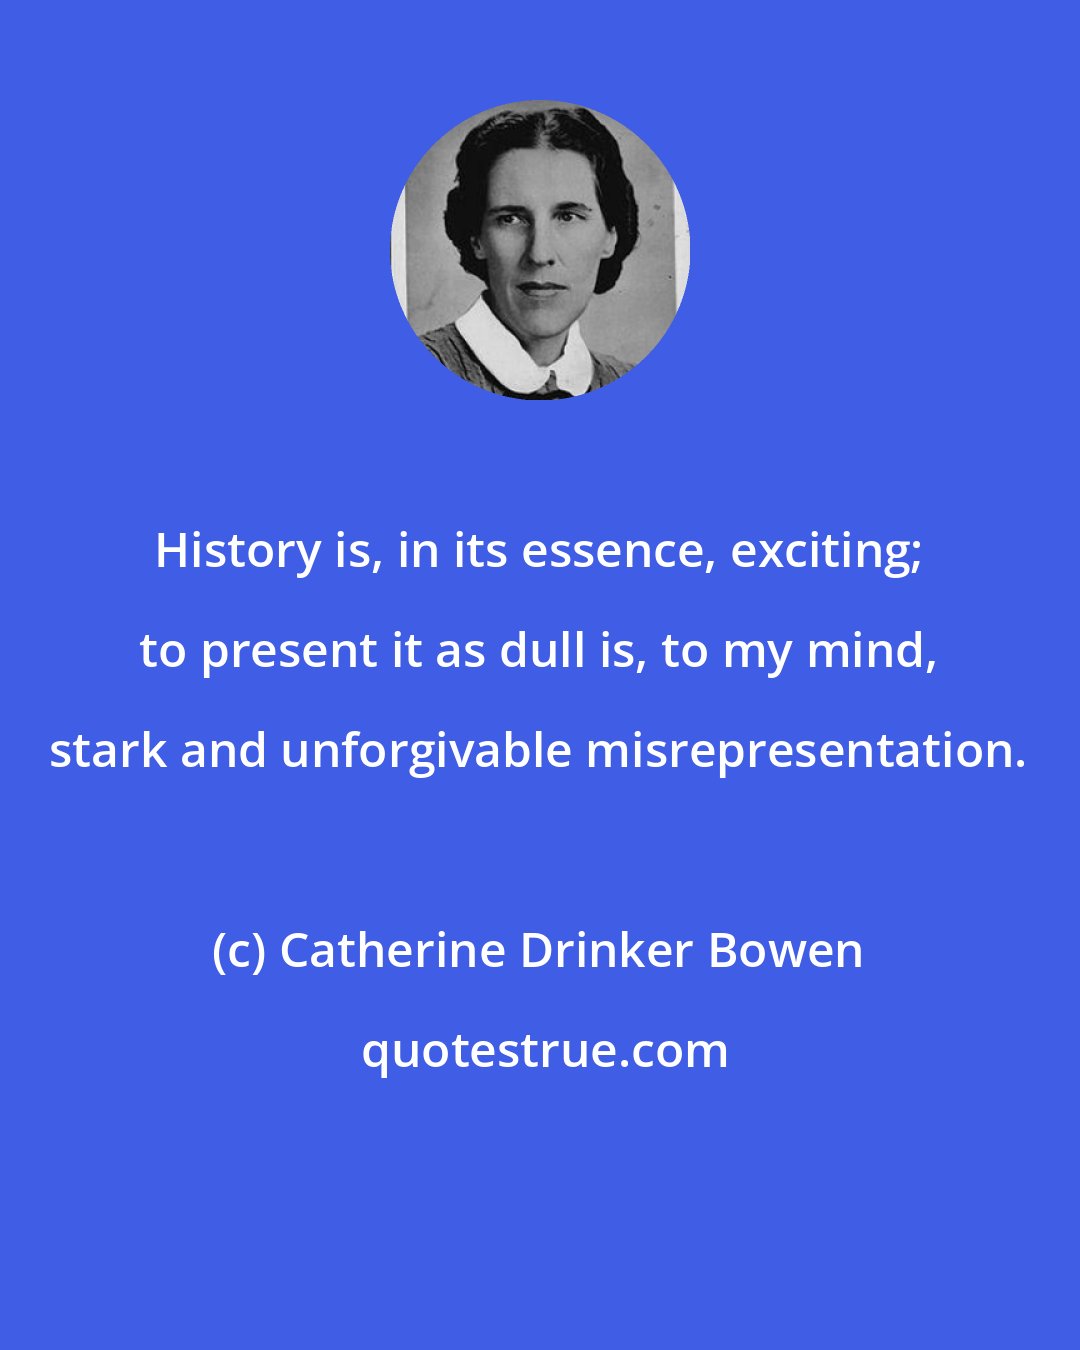 Catherine Drinker Bowen: History is, in its essence, exciting; to present it as dull is, to my mind, stark and unforgivable misrepresentation.